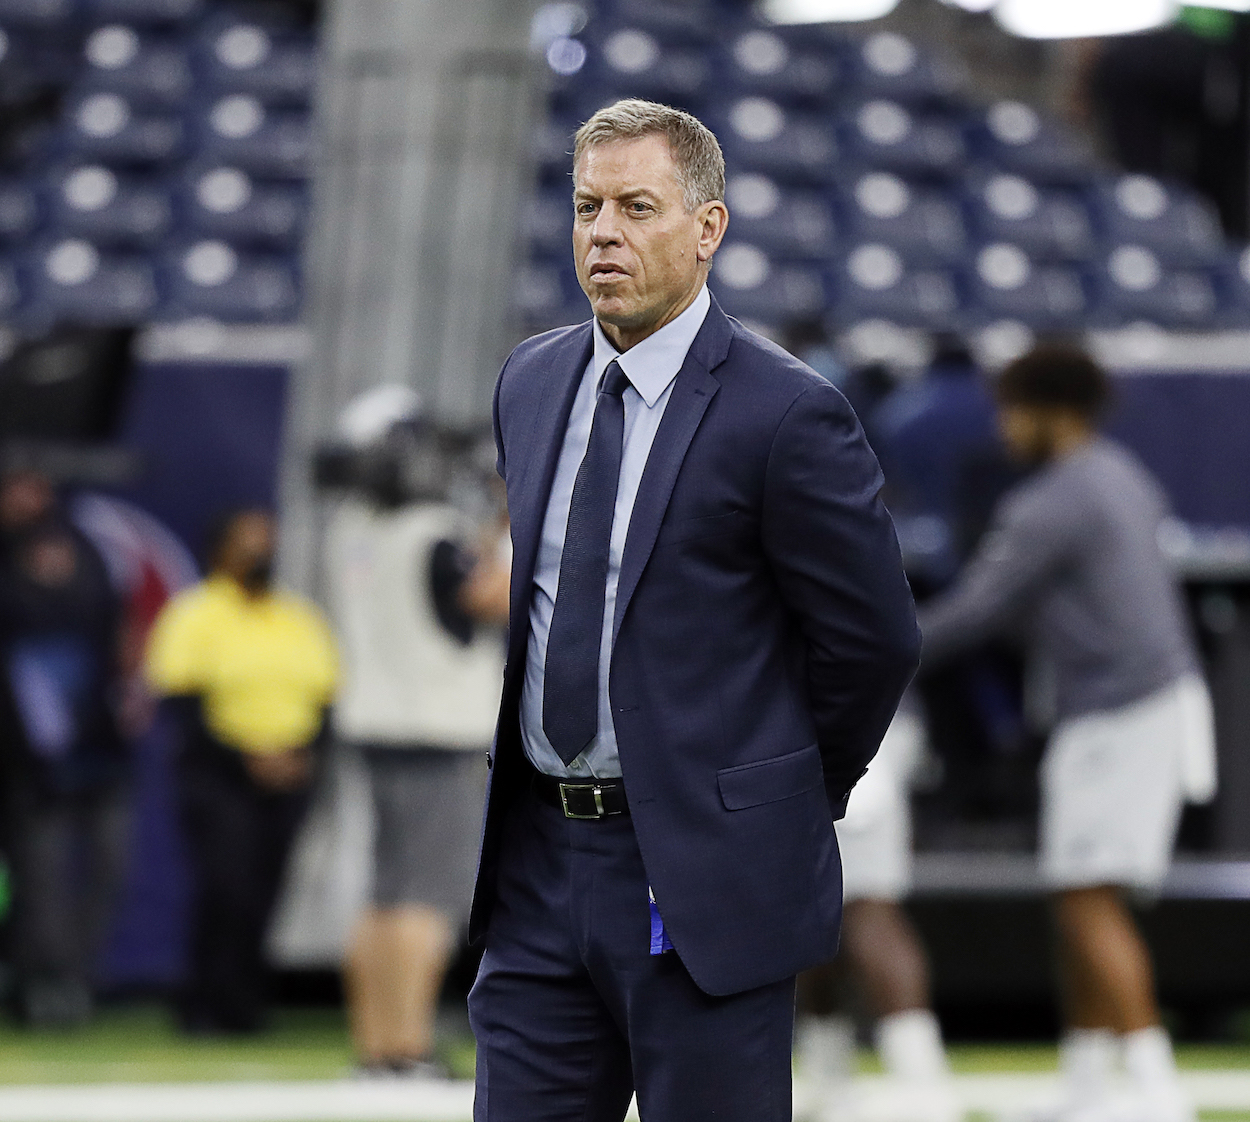 Former Cowboys QB Troy Aikman during a recent NFL game.